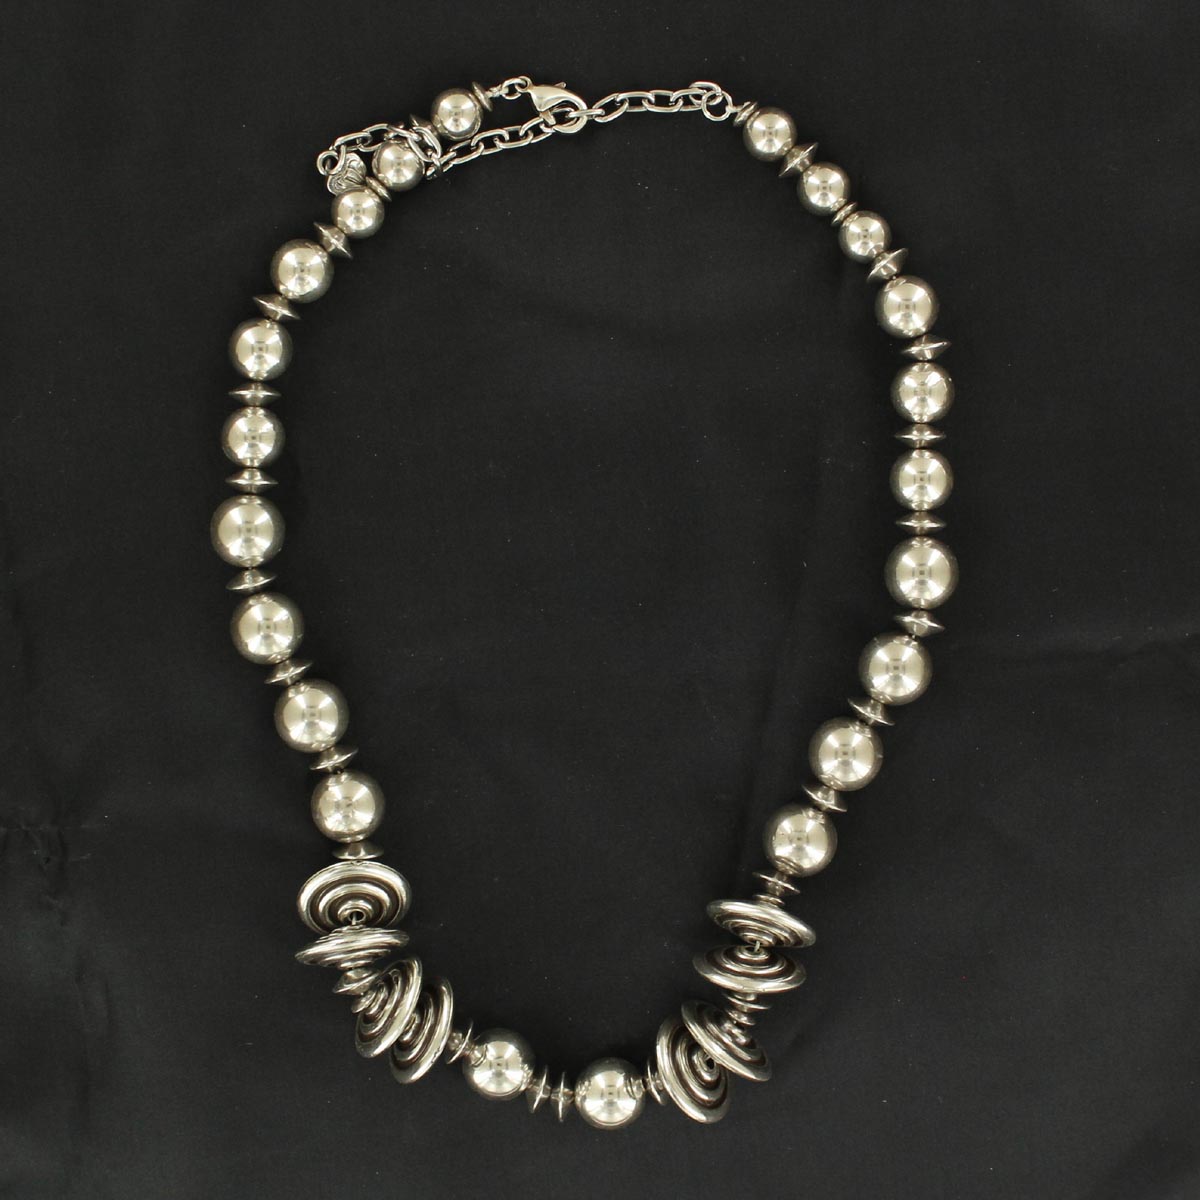 29245 Chunky Silver Tone Bead Necklace, Silver Tone - 17 In.